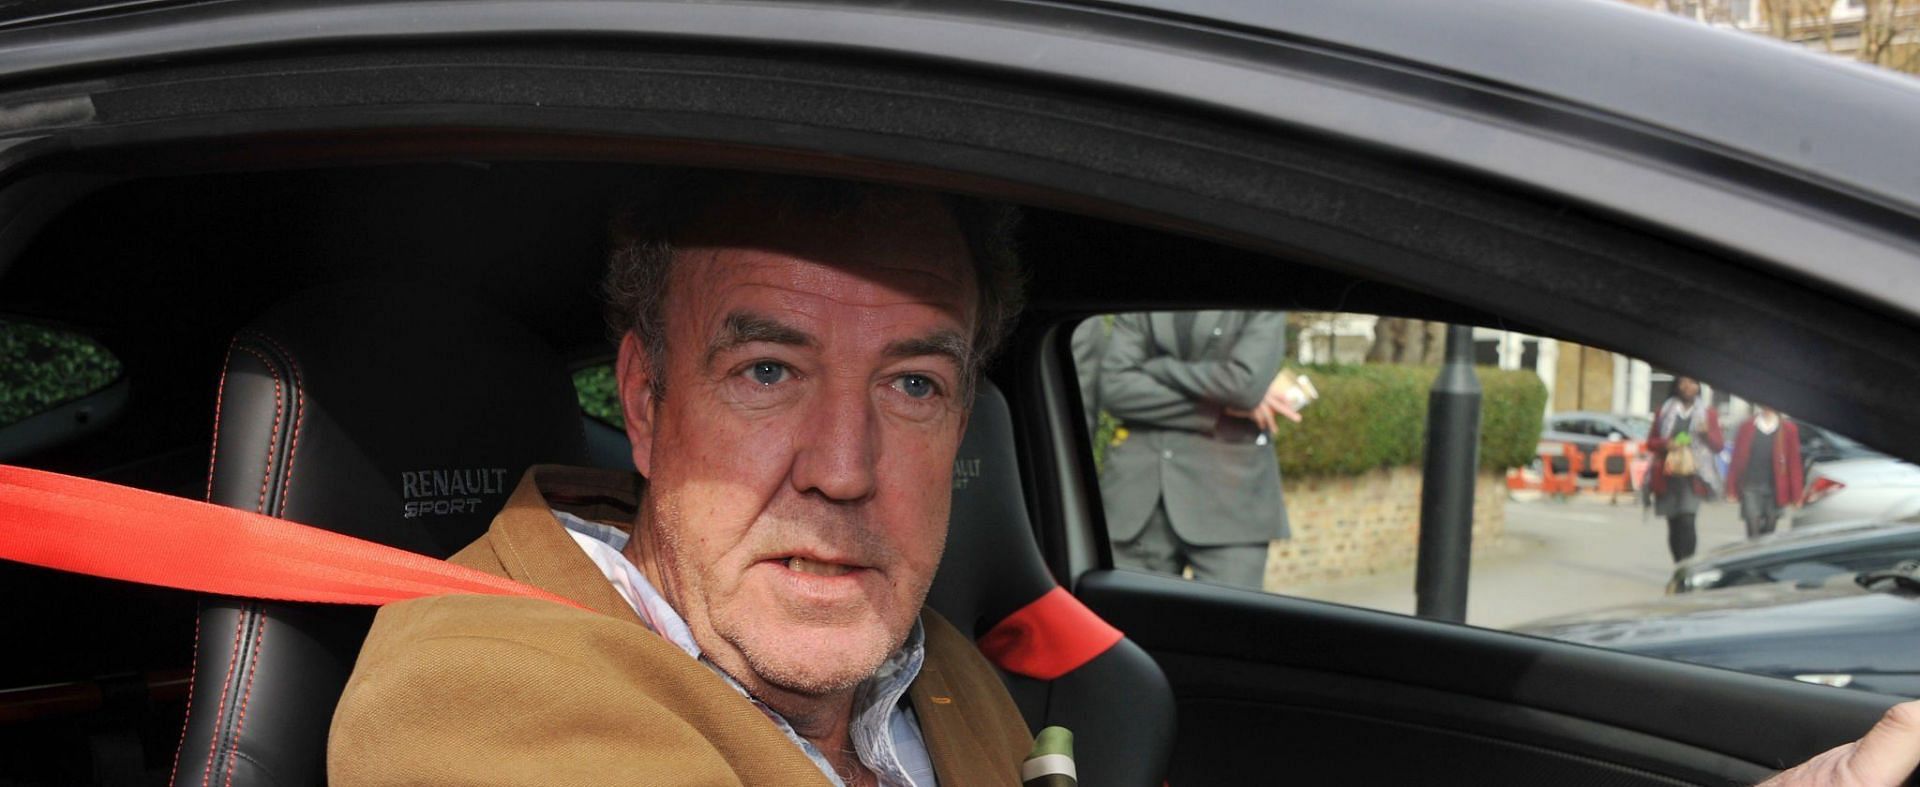 Jeremy Clarkson faced major online backlash following harsh comments on Meghan Markle (Image via Getty Images)